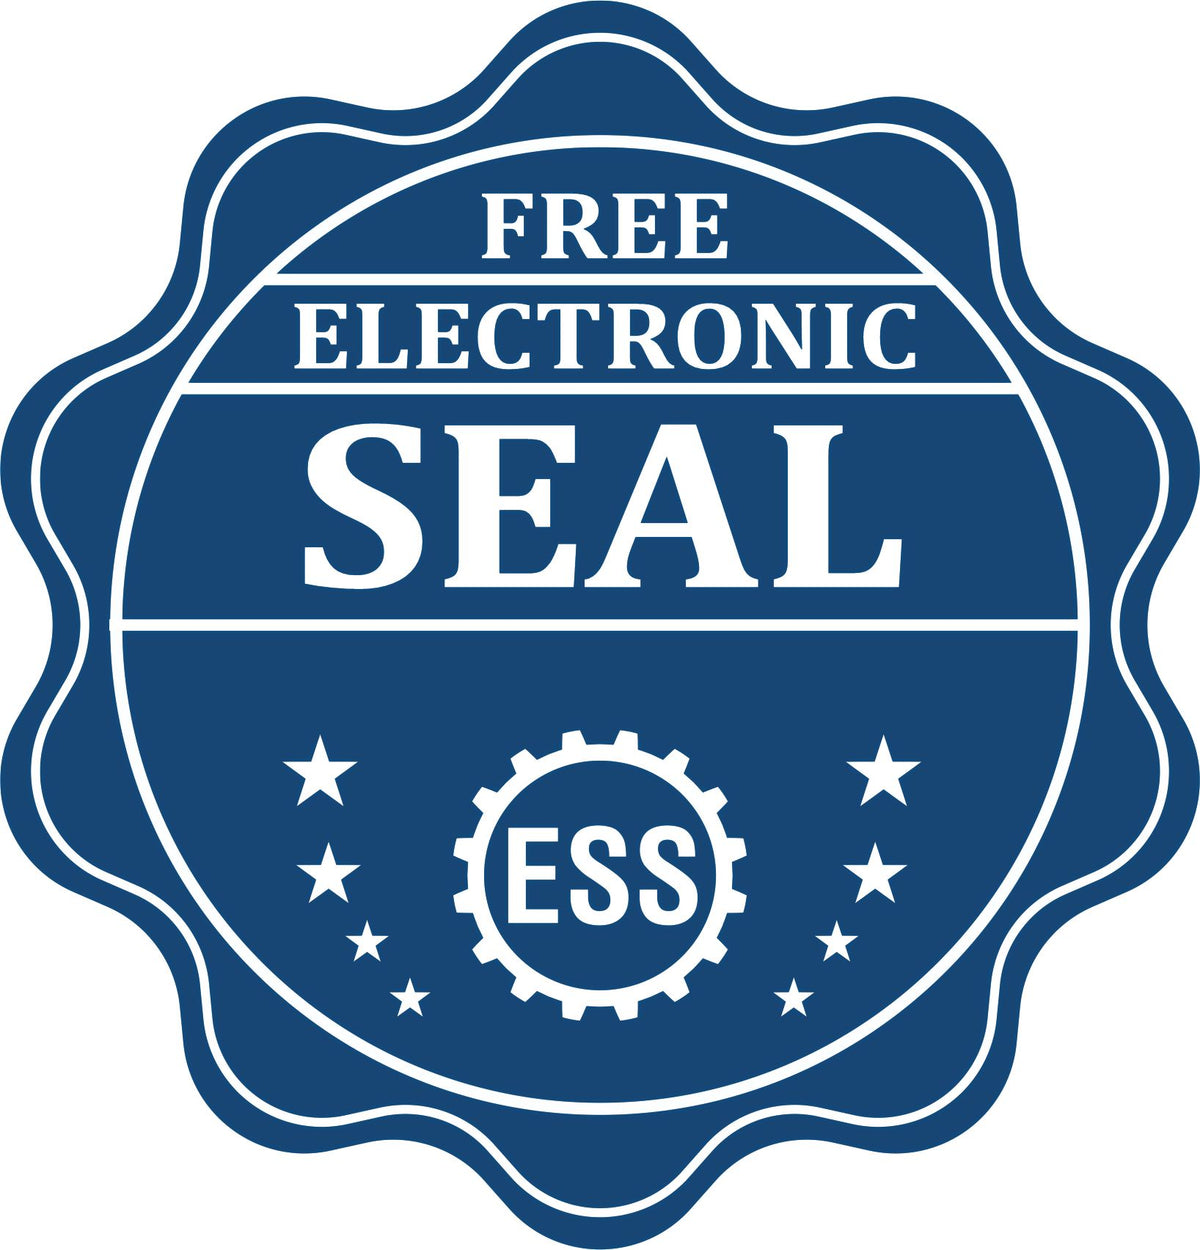 A badge showing a free electronic seal for the Handheld Ohio Professional Engineer Embosser with stars and the ESS gear on the emblem.